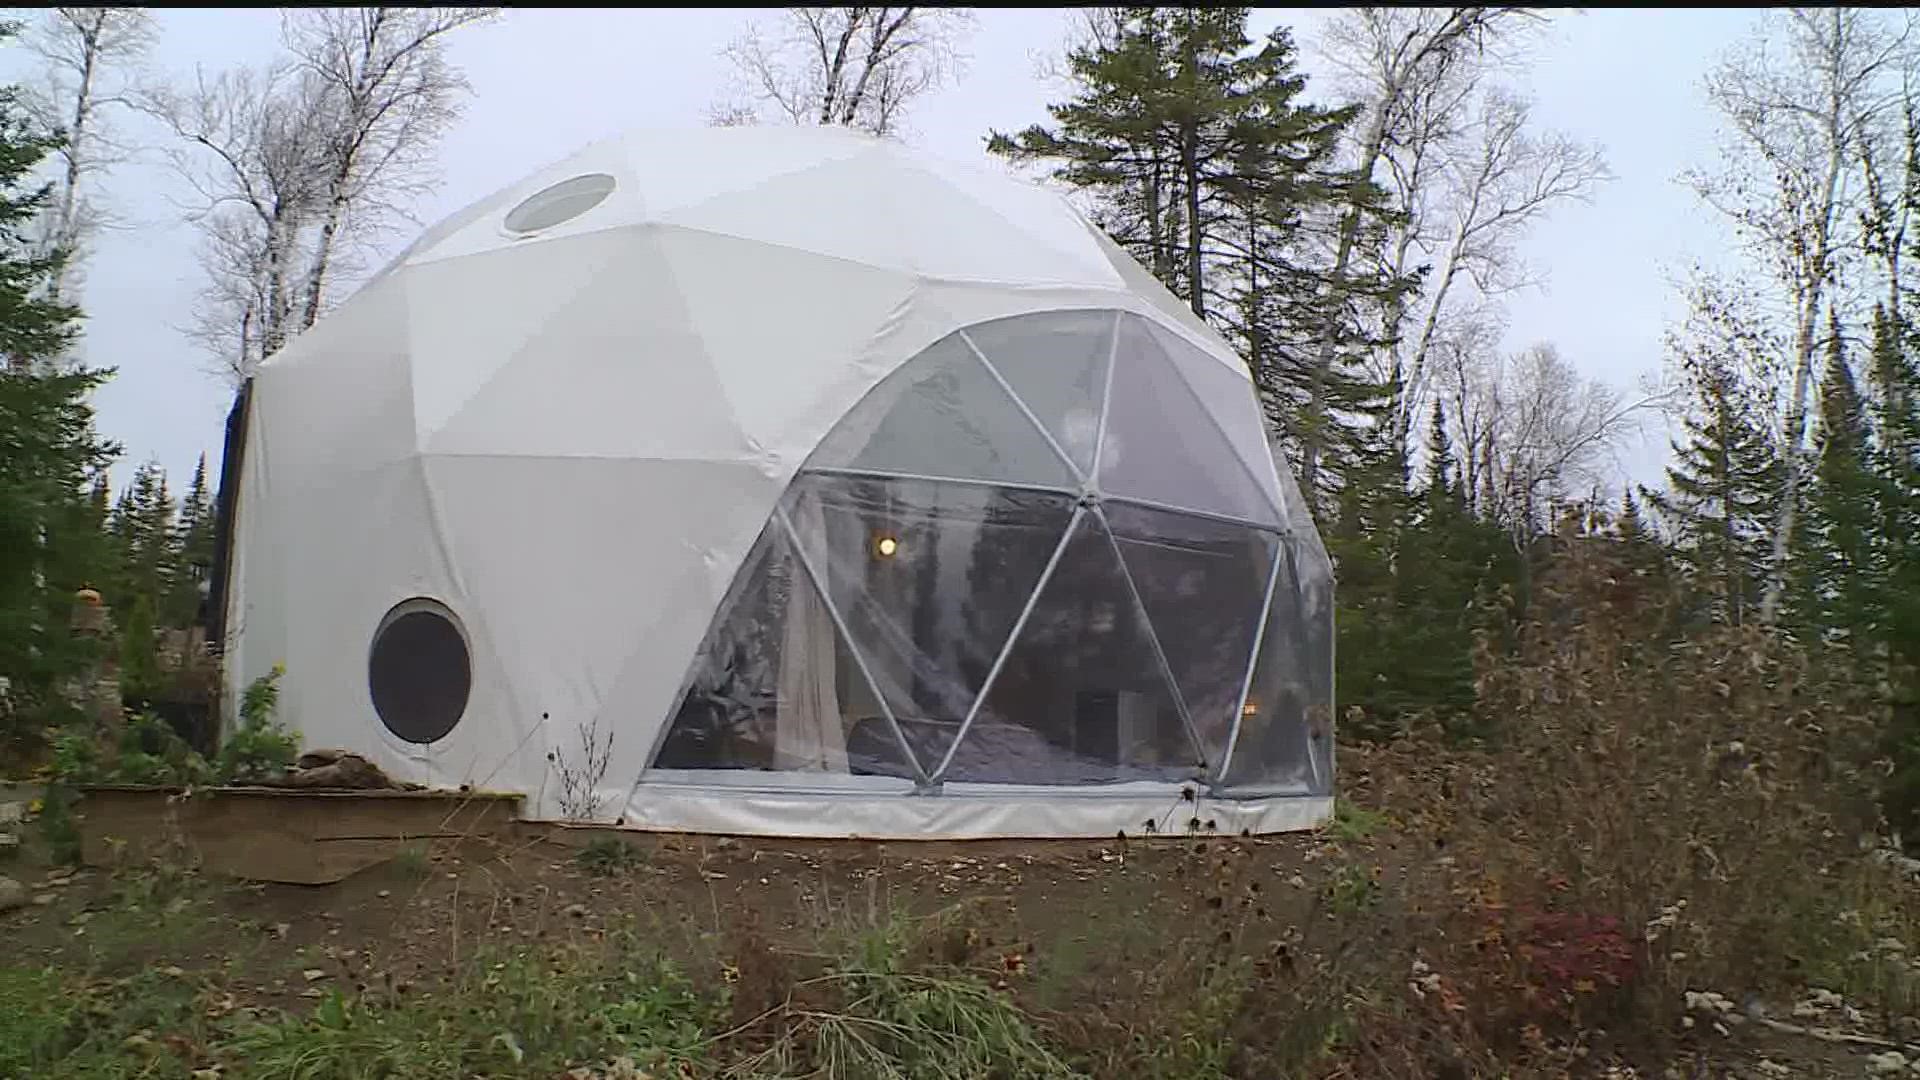 Geodomes give guests an outdoor experience with all the amenities of a high end hotel room.